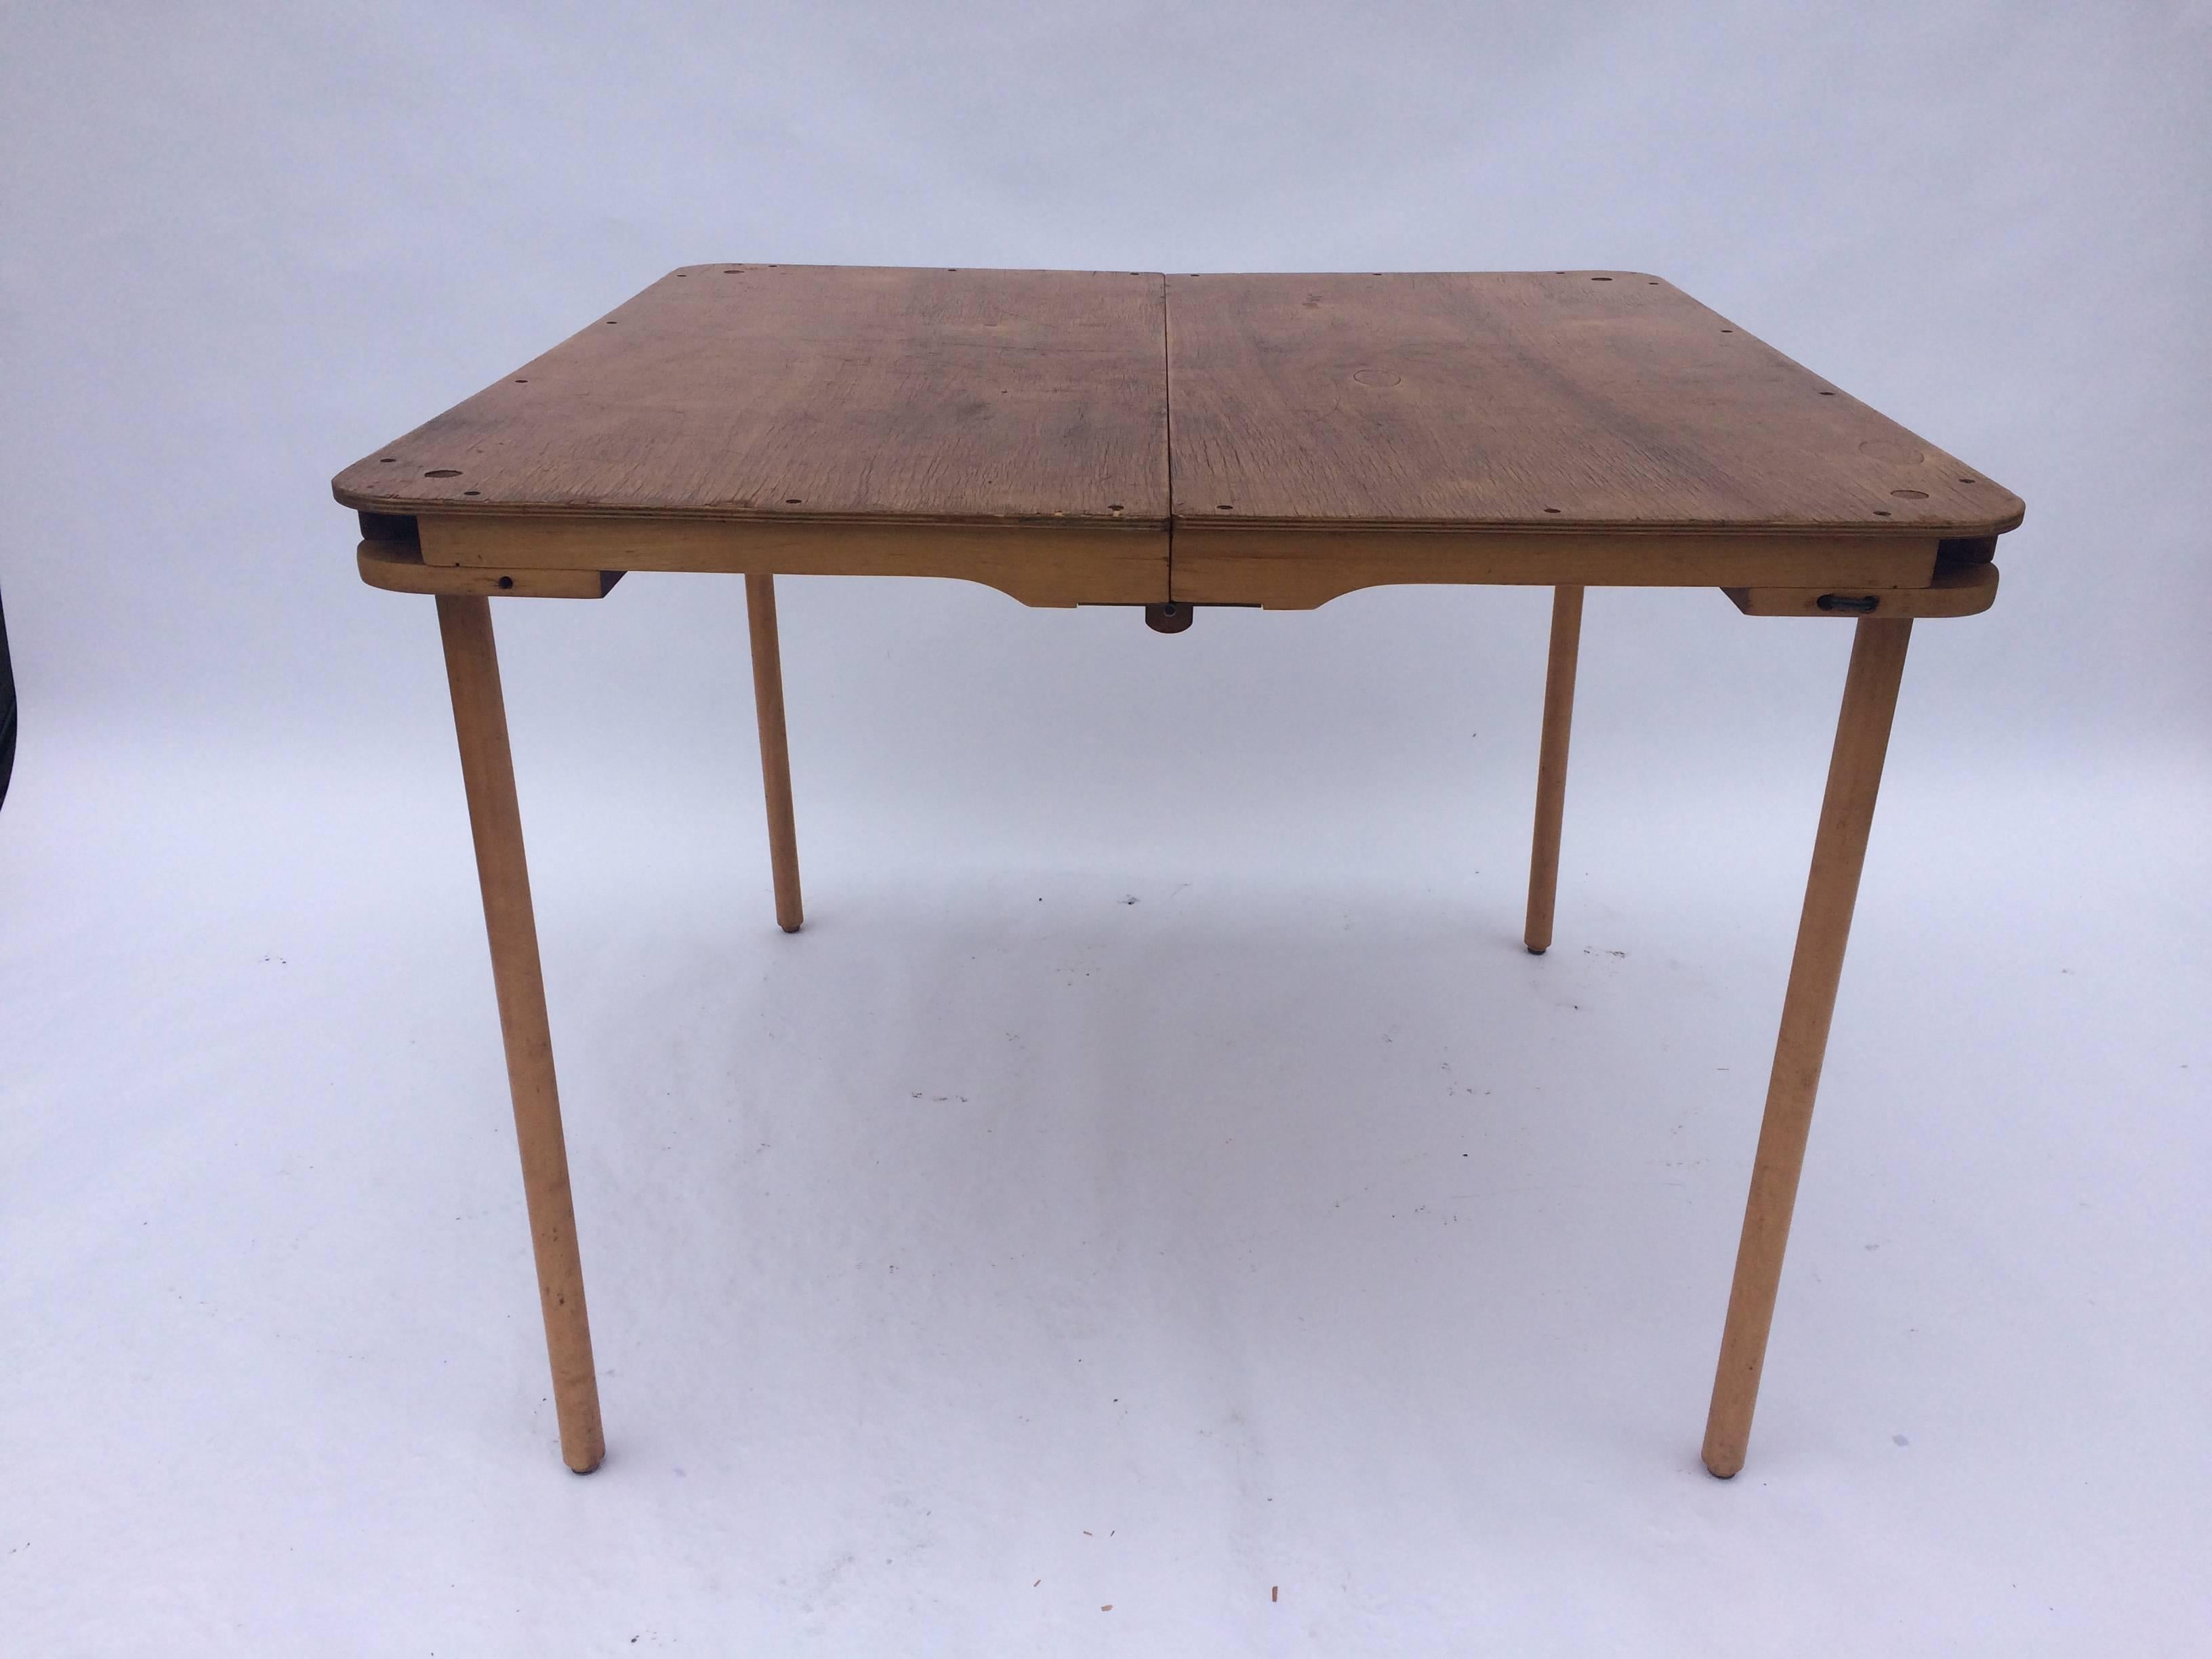 Plywood table and plywood and canvas stools by Barry Simpson, manufactured by Dirt Road in Waitsfield, Vermont between 1976-1984. Marked on underside of seat: ROOSTER BY DIRT ROAD / WAITSFIELD, VT. One stool was perhaps replaced earlier than the